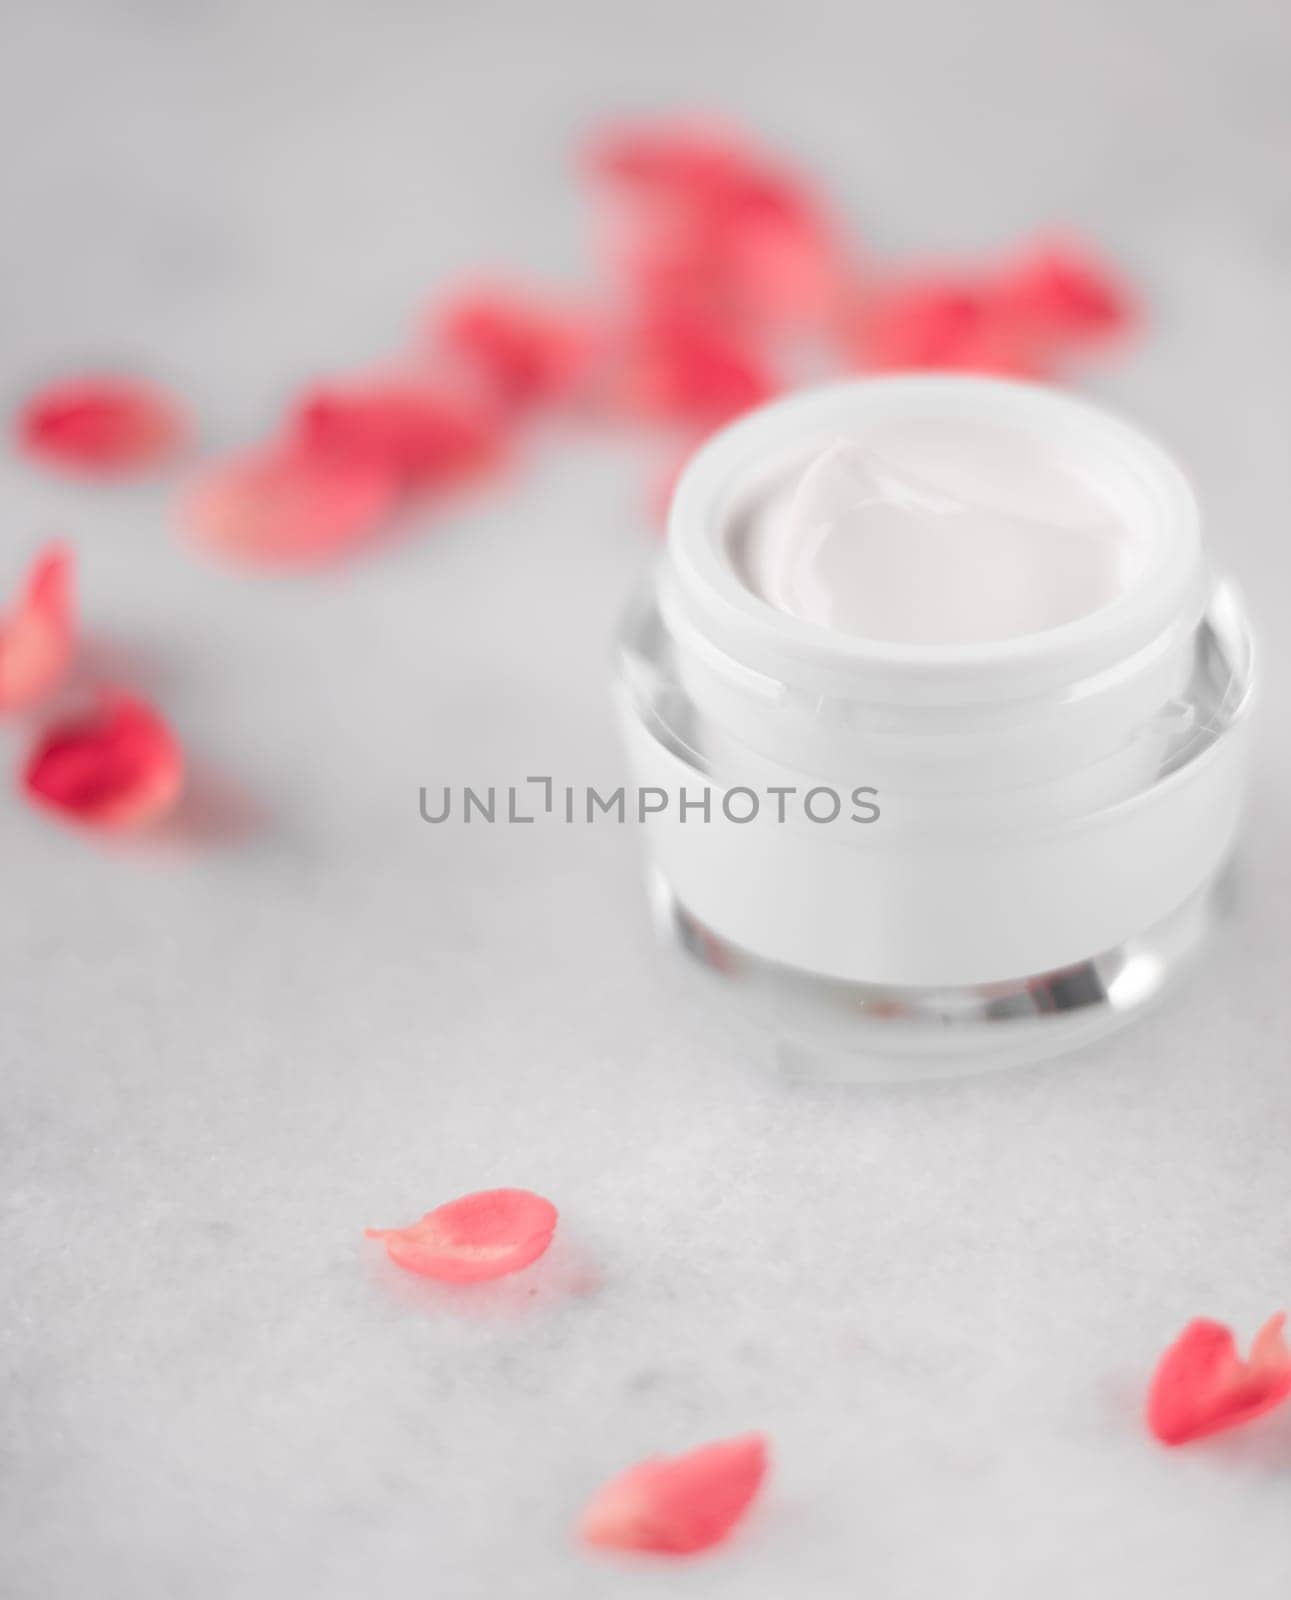 luxe face cream and rose petals - cosmetics with flowers styled beauty concept by Anneleven